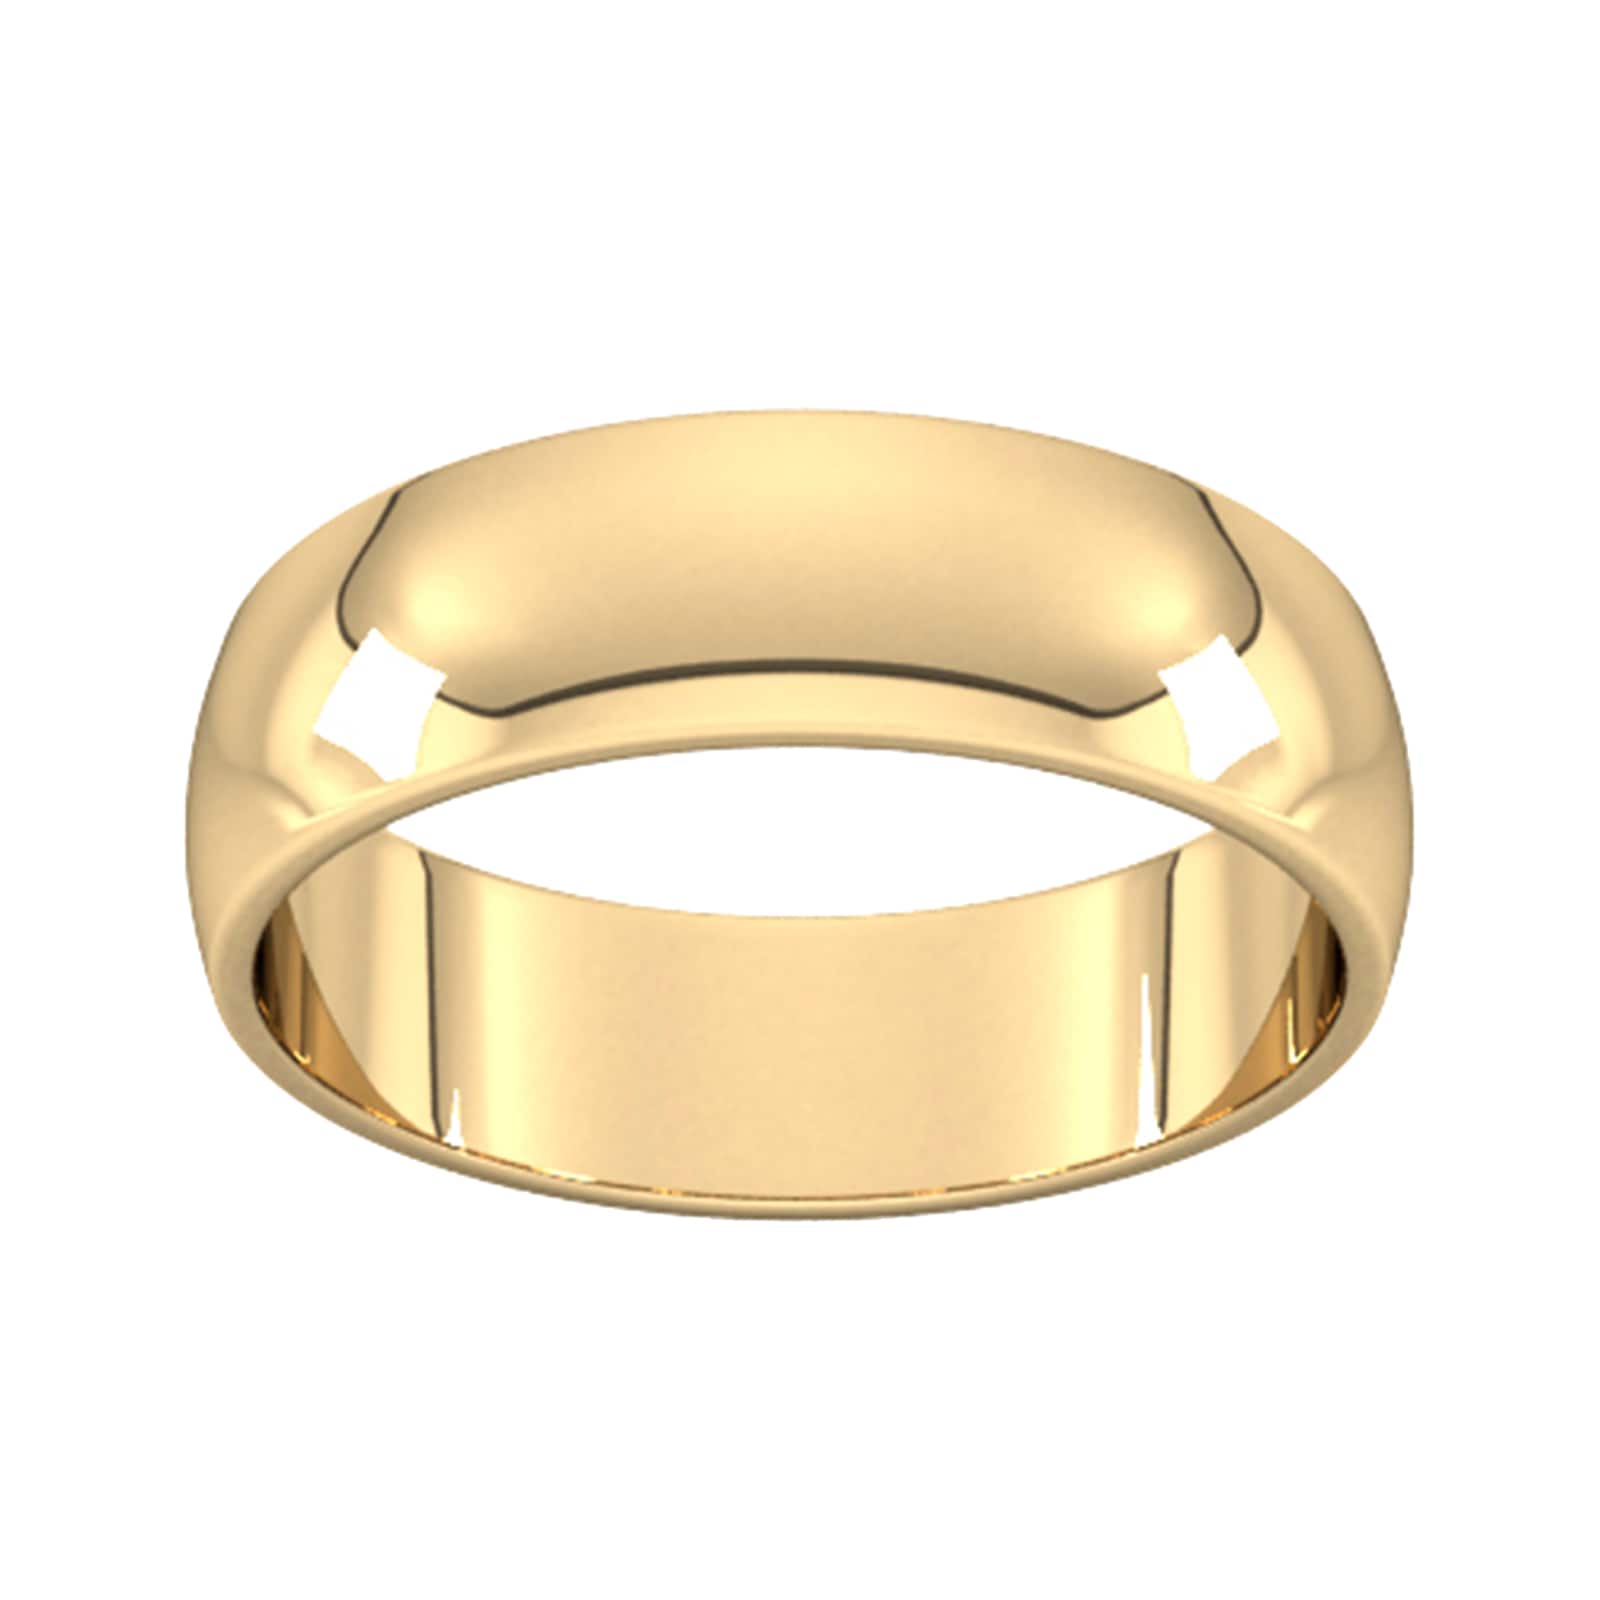 6mm D Shape Standard Wedding Ring In 9 Carat Yellow Gold - Ring Size P